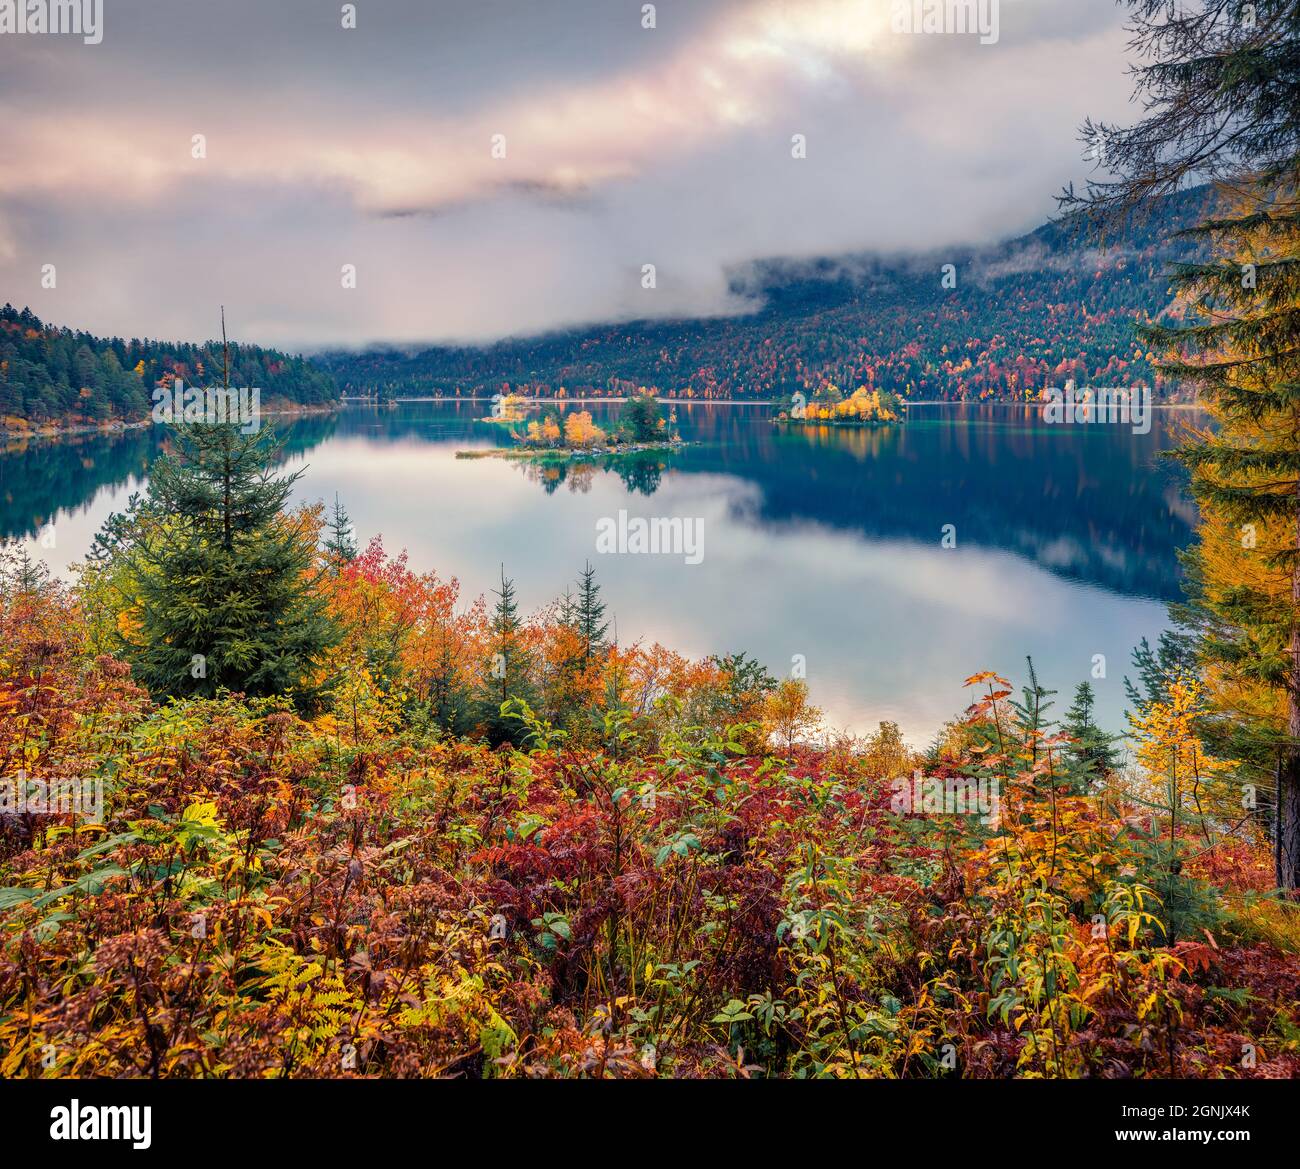 Gloomy morning view of Eibsee lake. Captivating autumn scene of Bavarian Alps, Germany, Europe. Foggy mountain hills reflected in the calm surface of Stock Photo